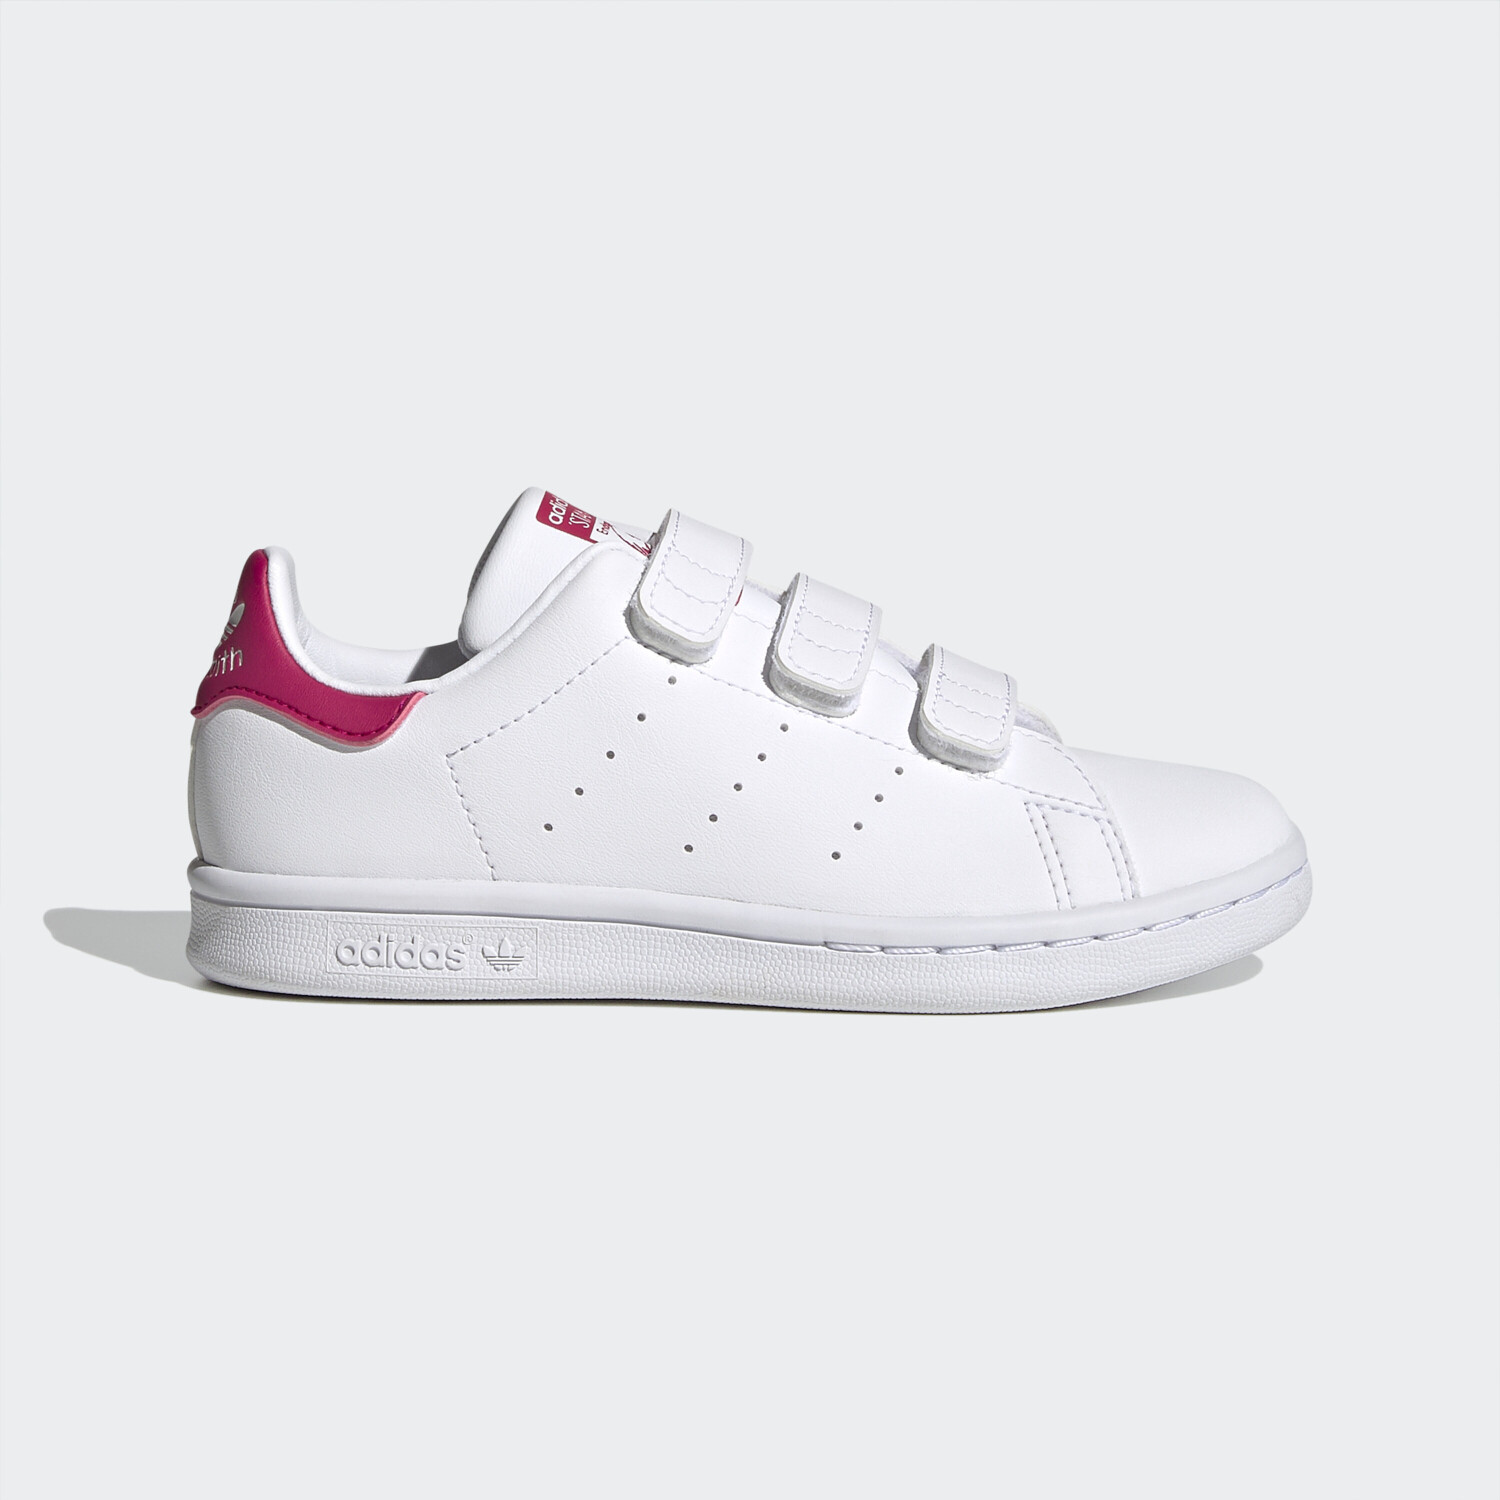 Buy Adidas Stan Smith Cloud White/Cloud White/Bold Pink Kinder from £32.50  (Today) – Best Deals on